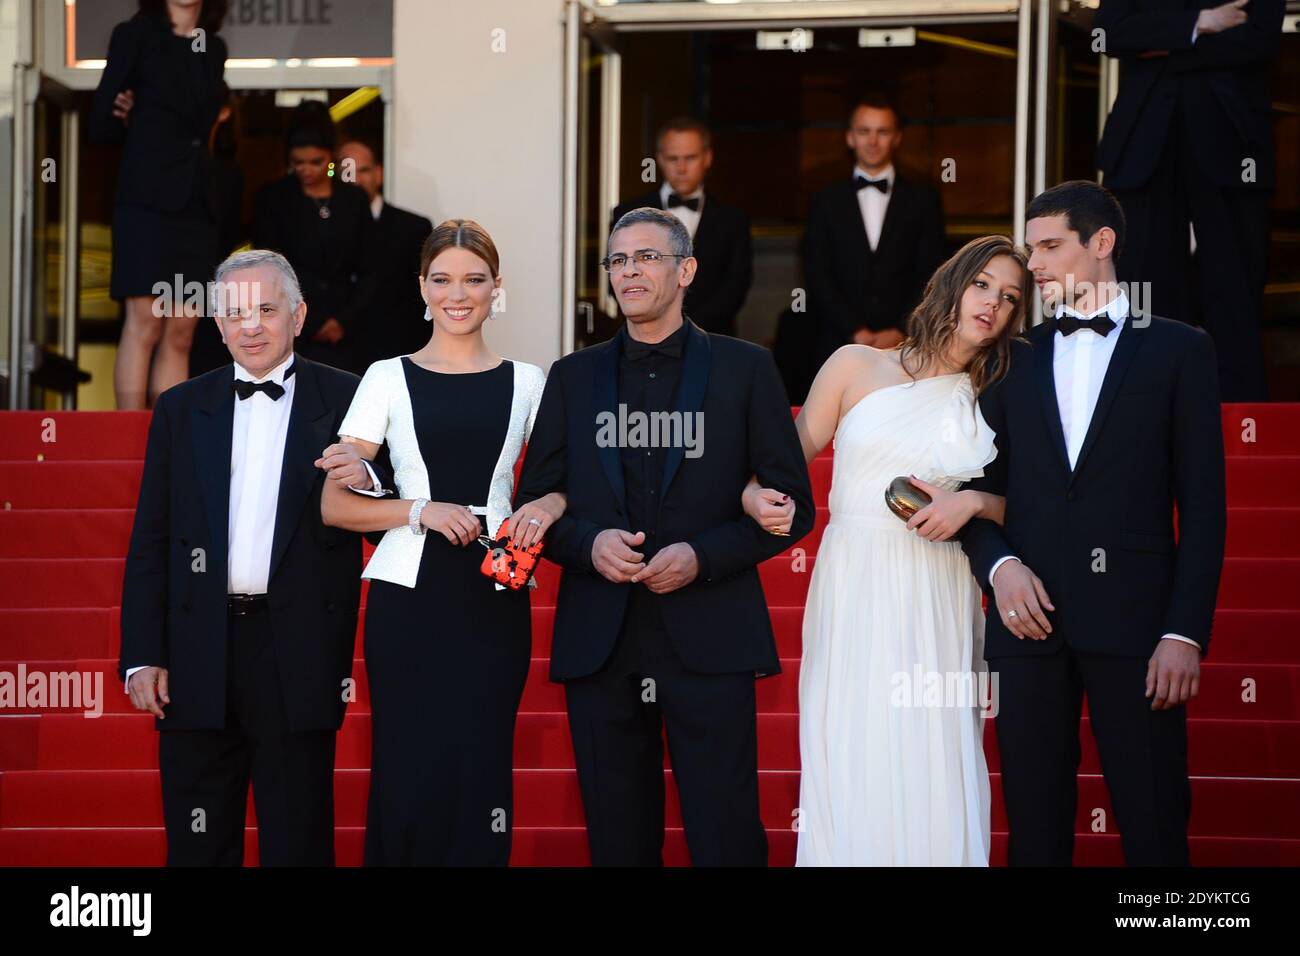 Producer Brahim Chioua, actress Lea Seydoux, director Abdellatif Kechiche, actors Adele Exarchopoulos and Jeremie Laheurte arriving for Zulu screening and closing ceremony held at the Palais des Festivals in Cannes, France on May 26, 2013, as part of the 66th Cannes Film Festival. Photo by Nicolas Briquet/ABACAPRESS.COM Stock Photo